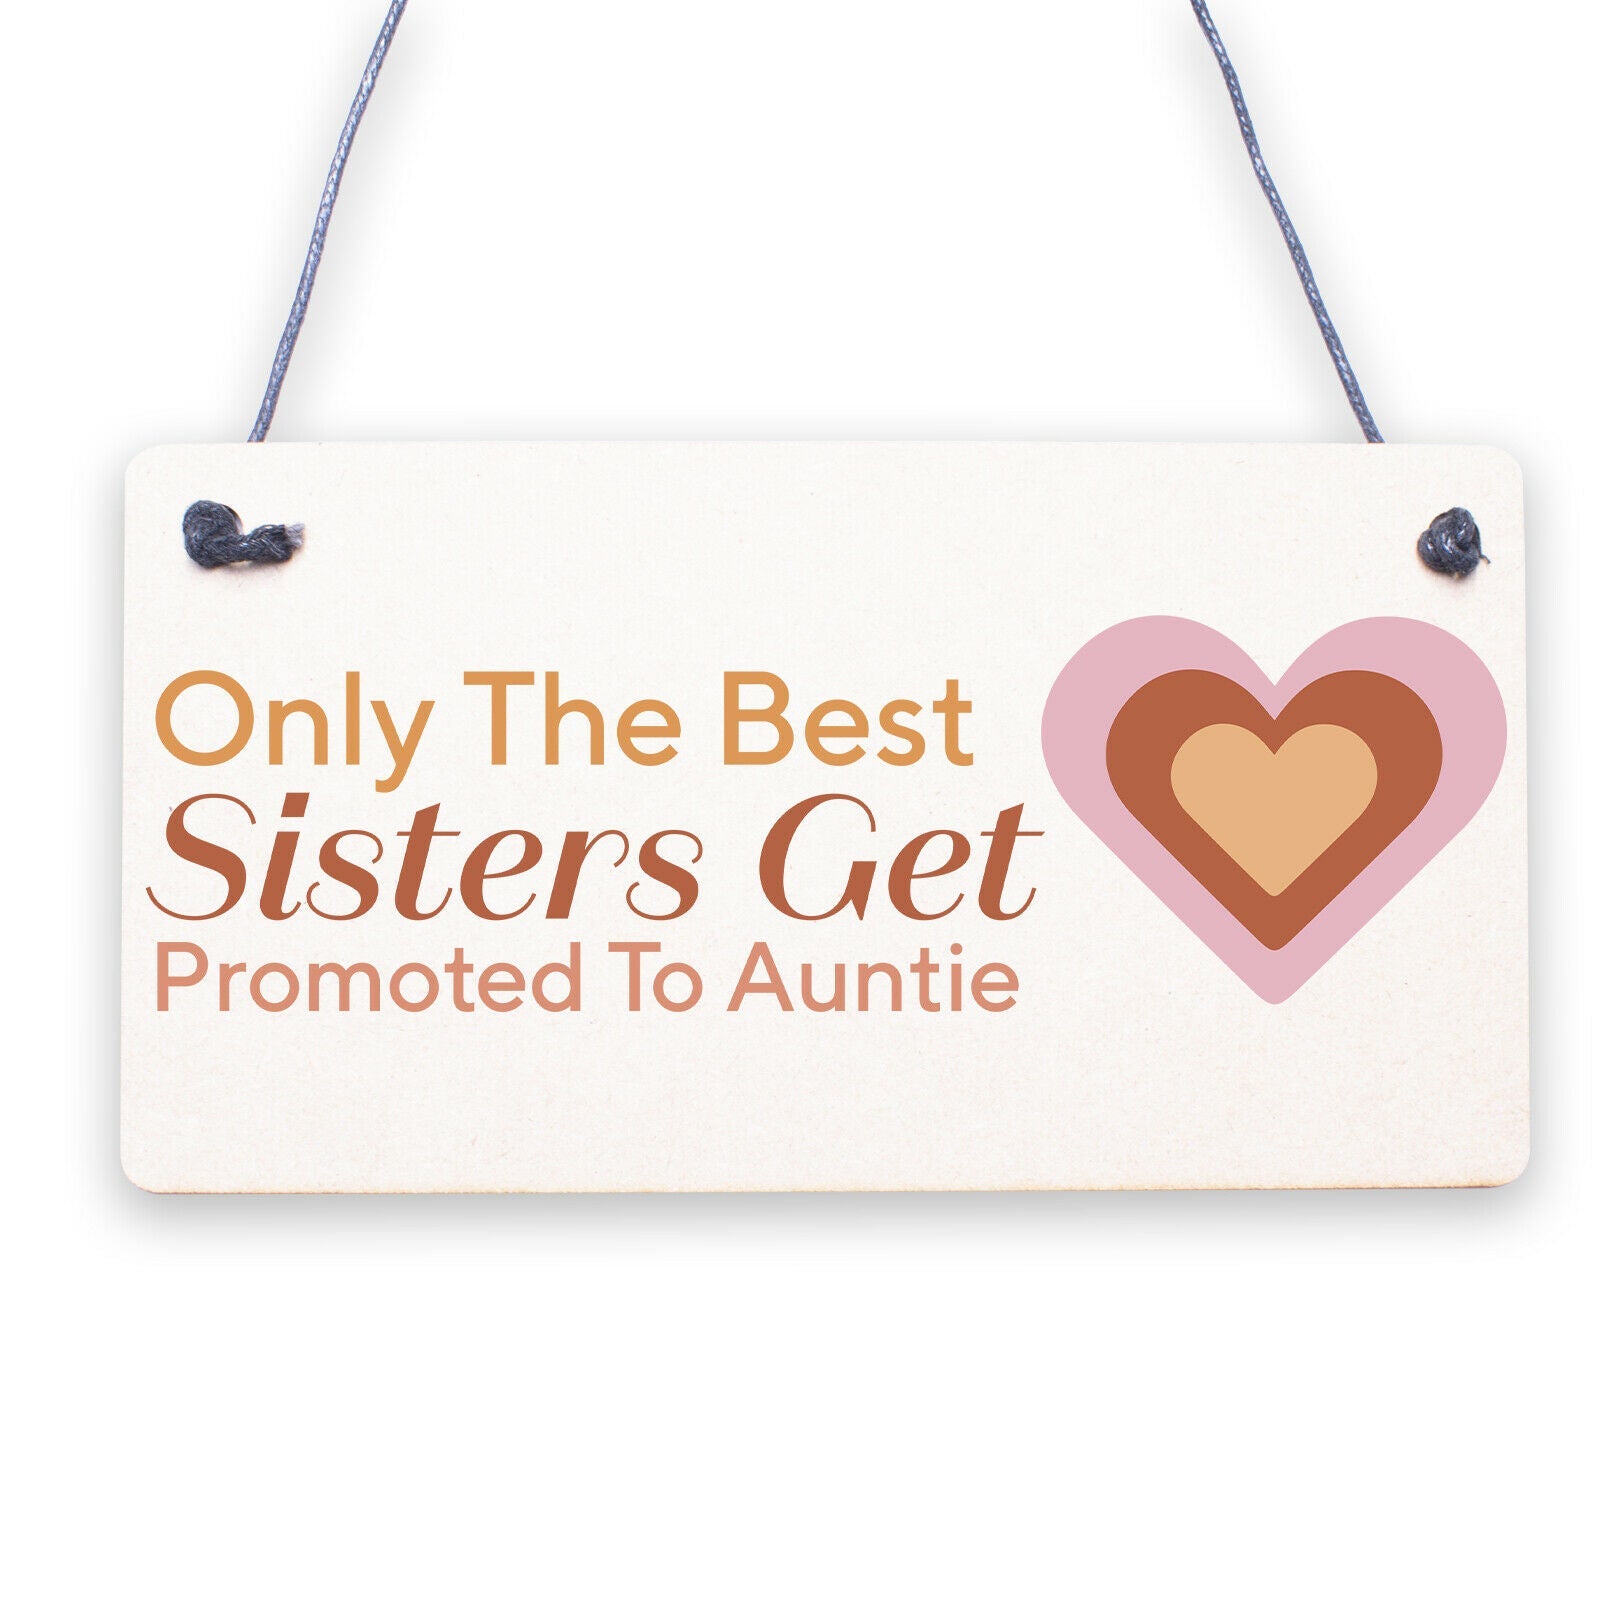 Only The Best Sisters Get Promoted To Auntie Wooden Hanging Plaque Sister Sign